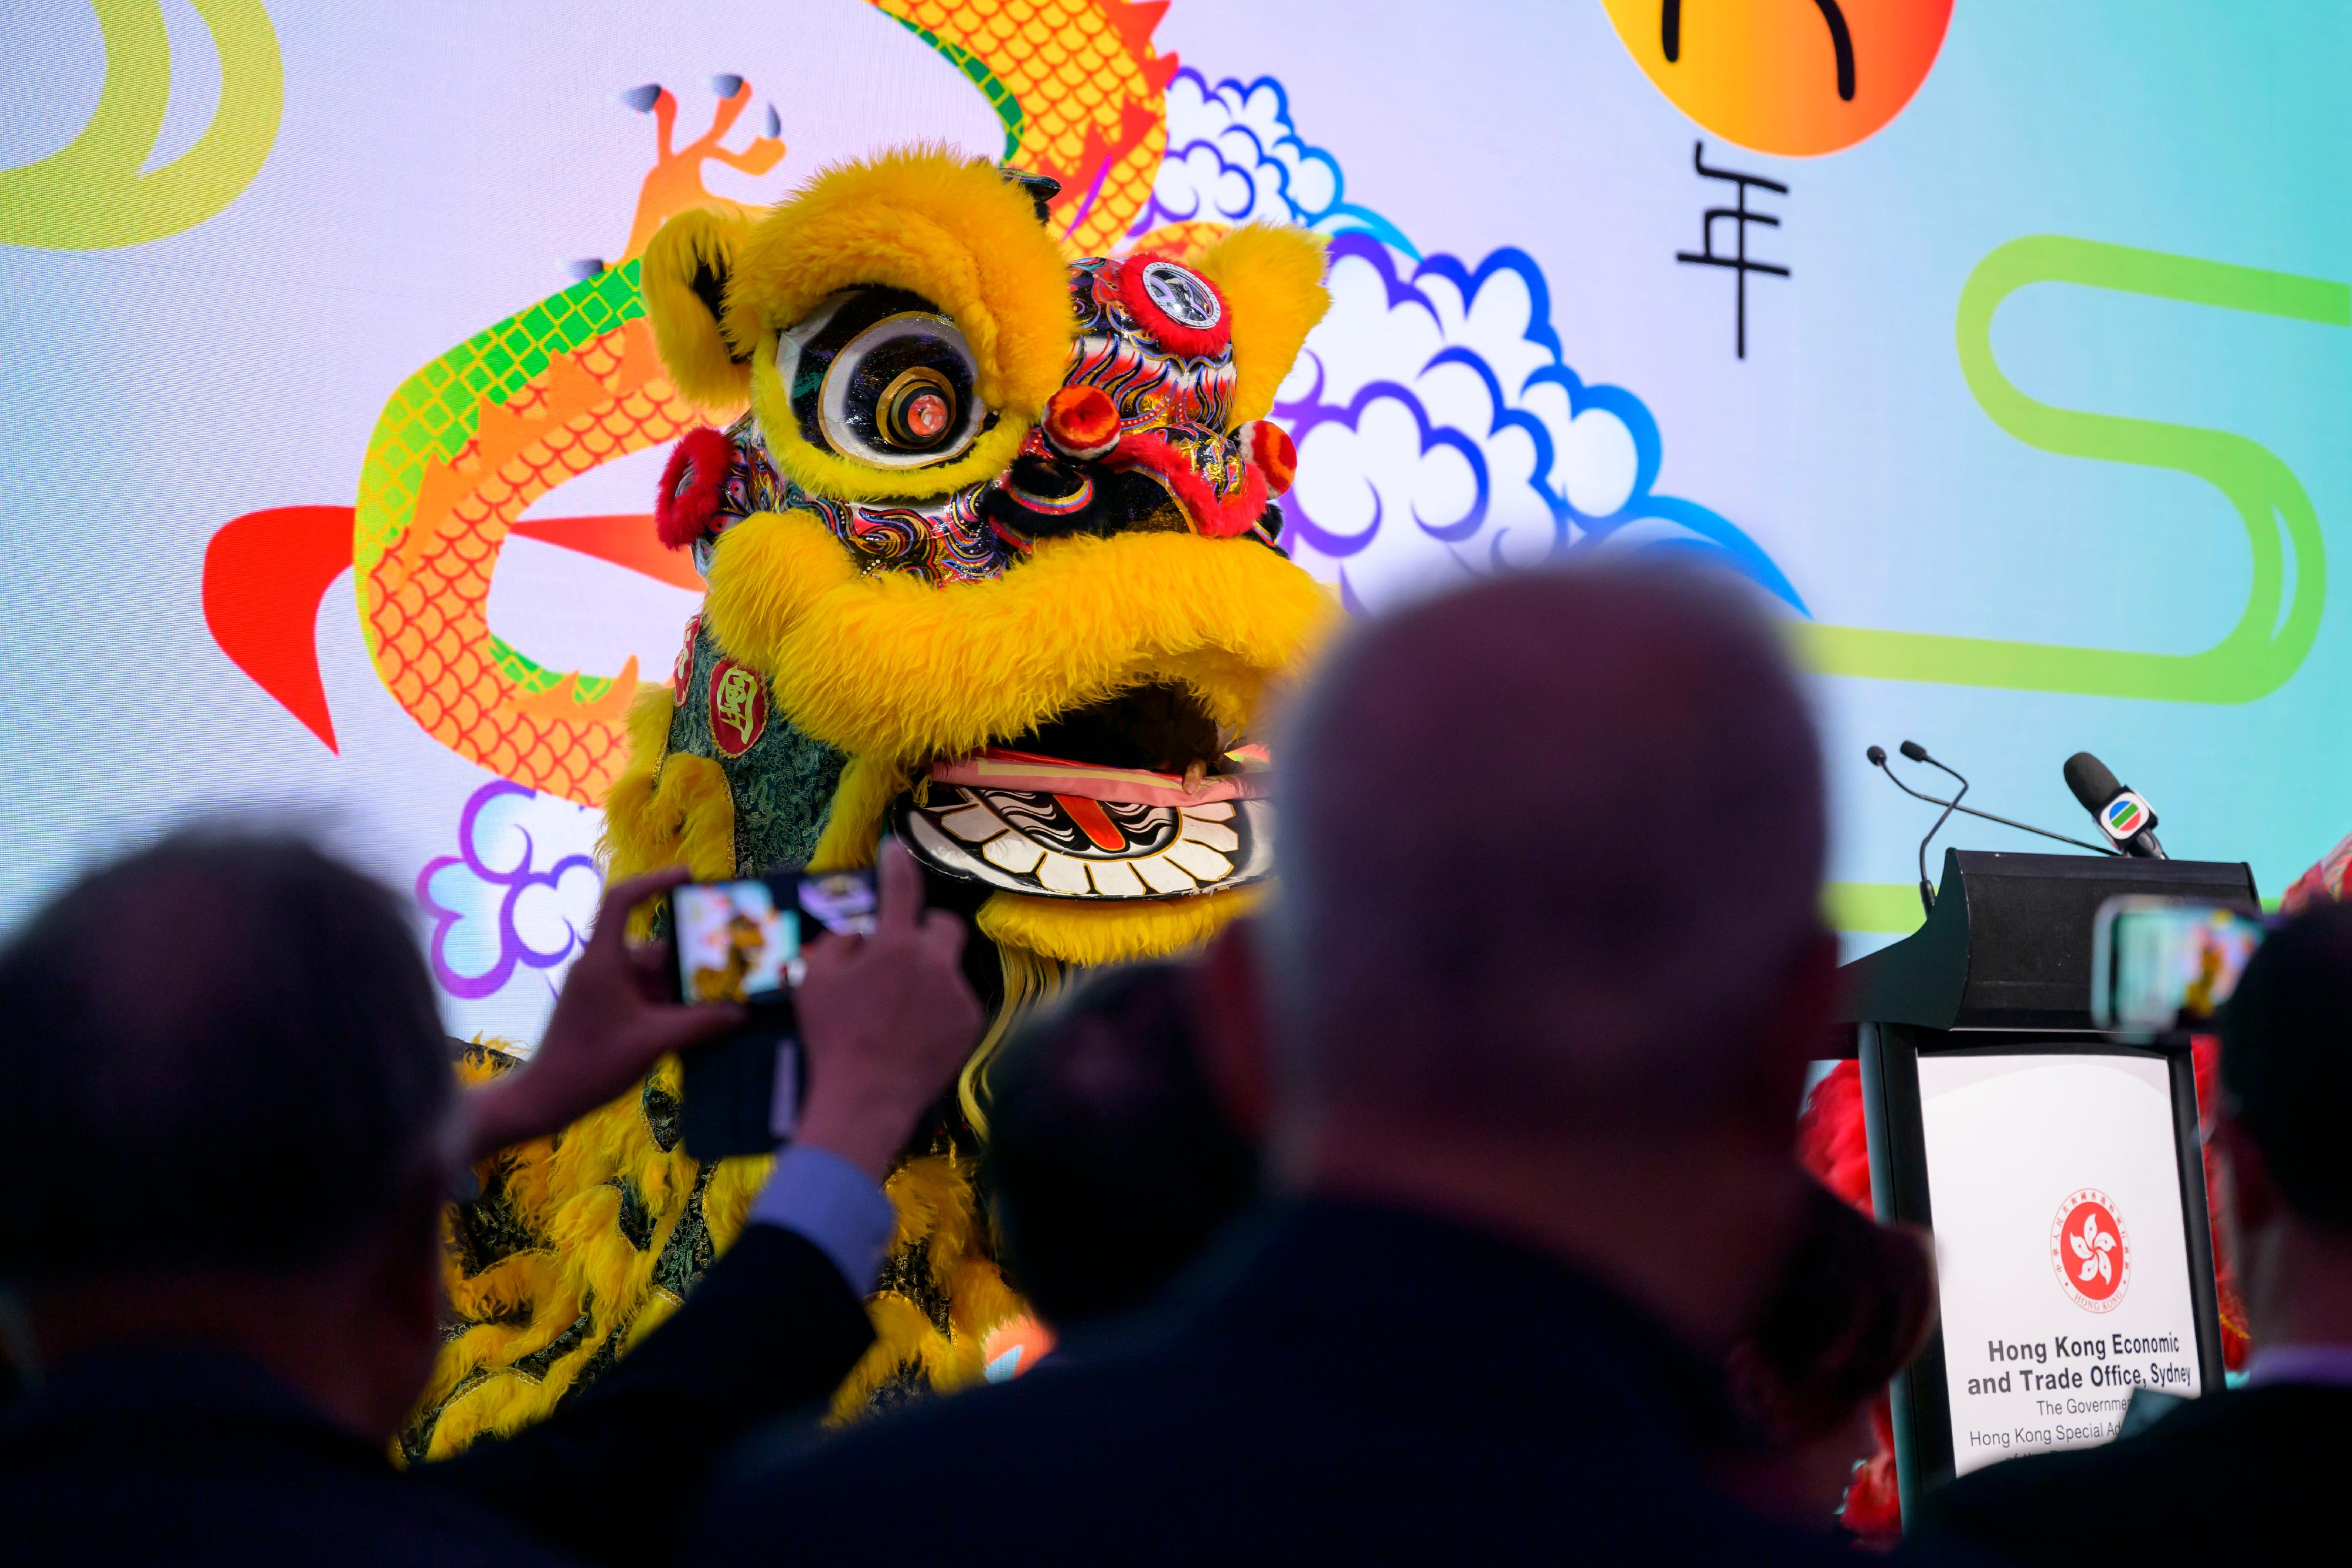 The Hong Kong Economic and Trade Office, Sydney hosted a reception in Sydney, Australia, yesterday (February 20) to celebrate the Year of the Dragon. Photo shows a lion dance performance at the reception.